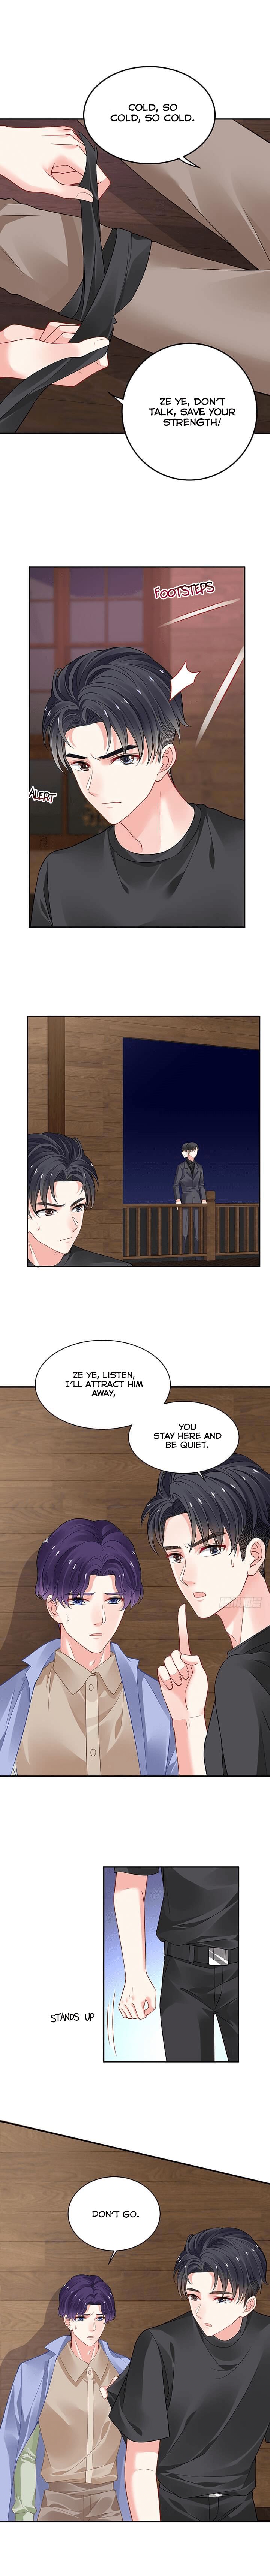 My ¼ Boyfriends Ch. 43 I will come back to find you